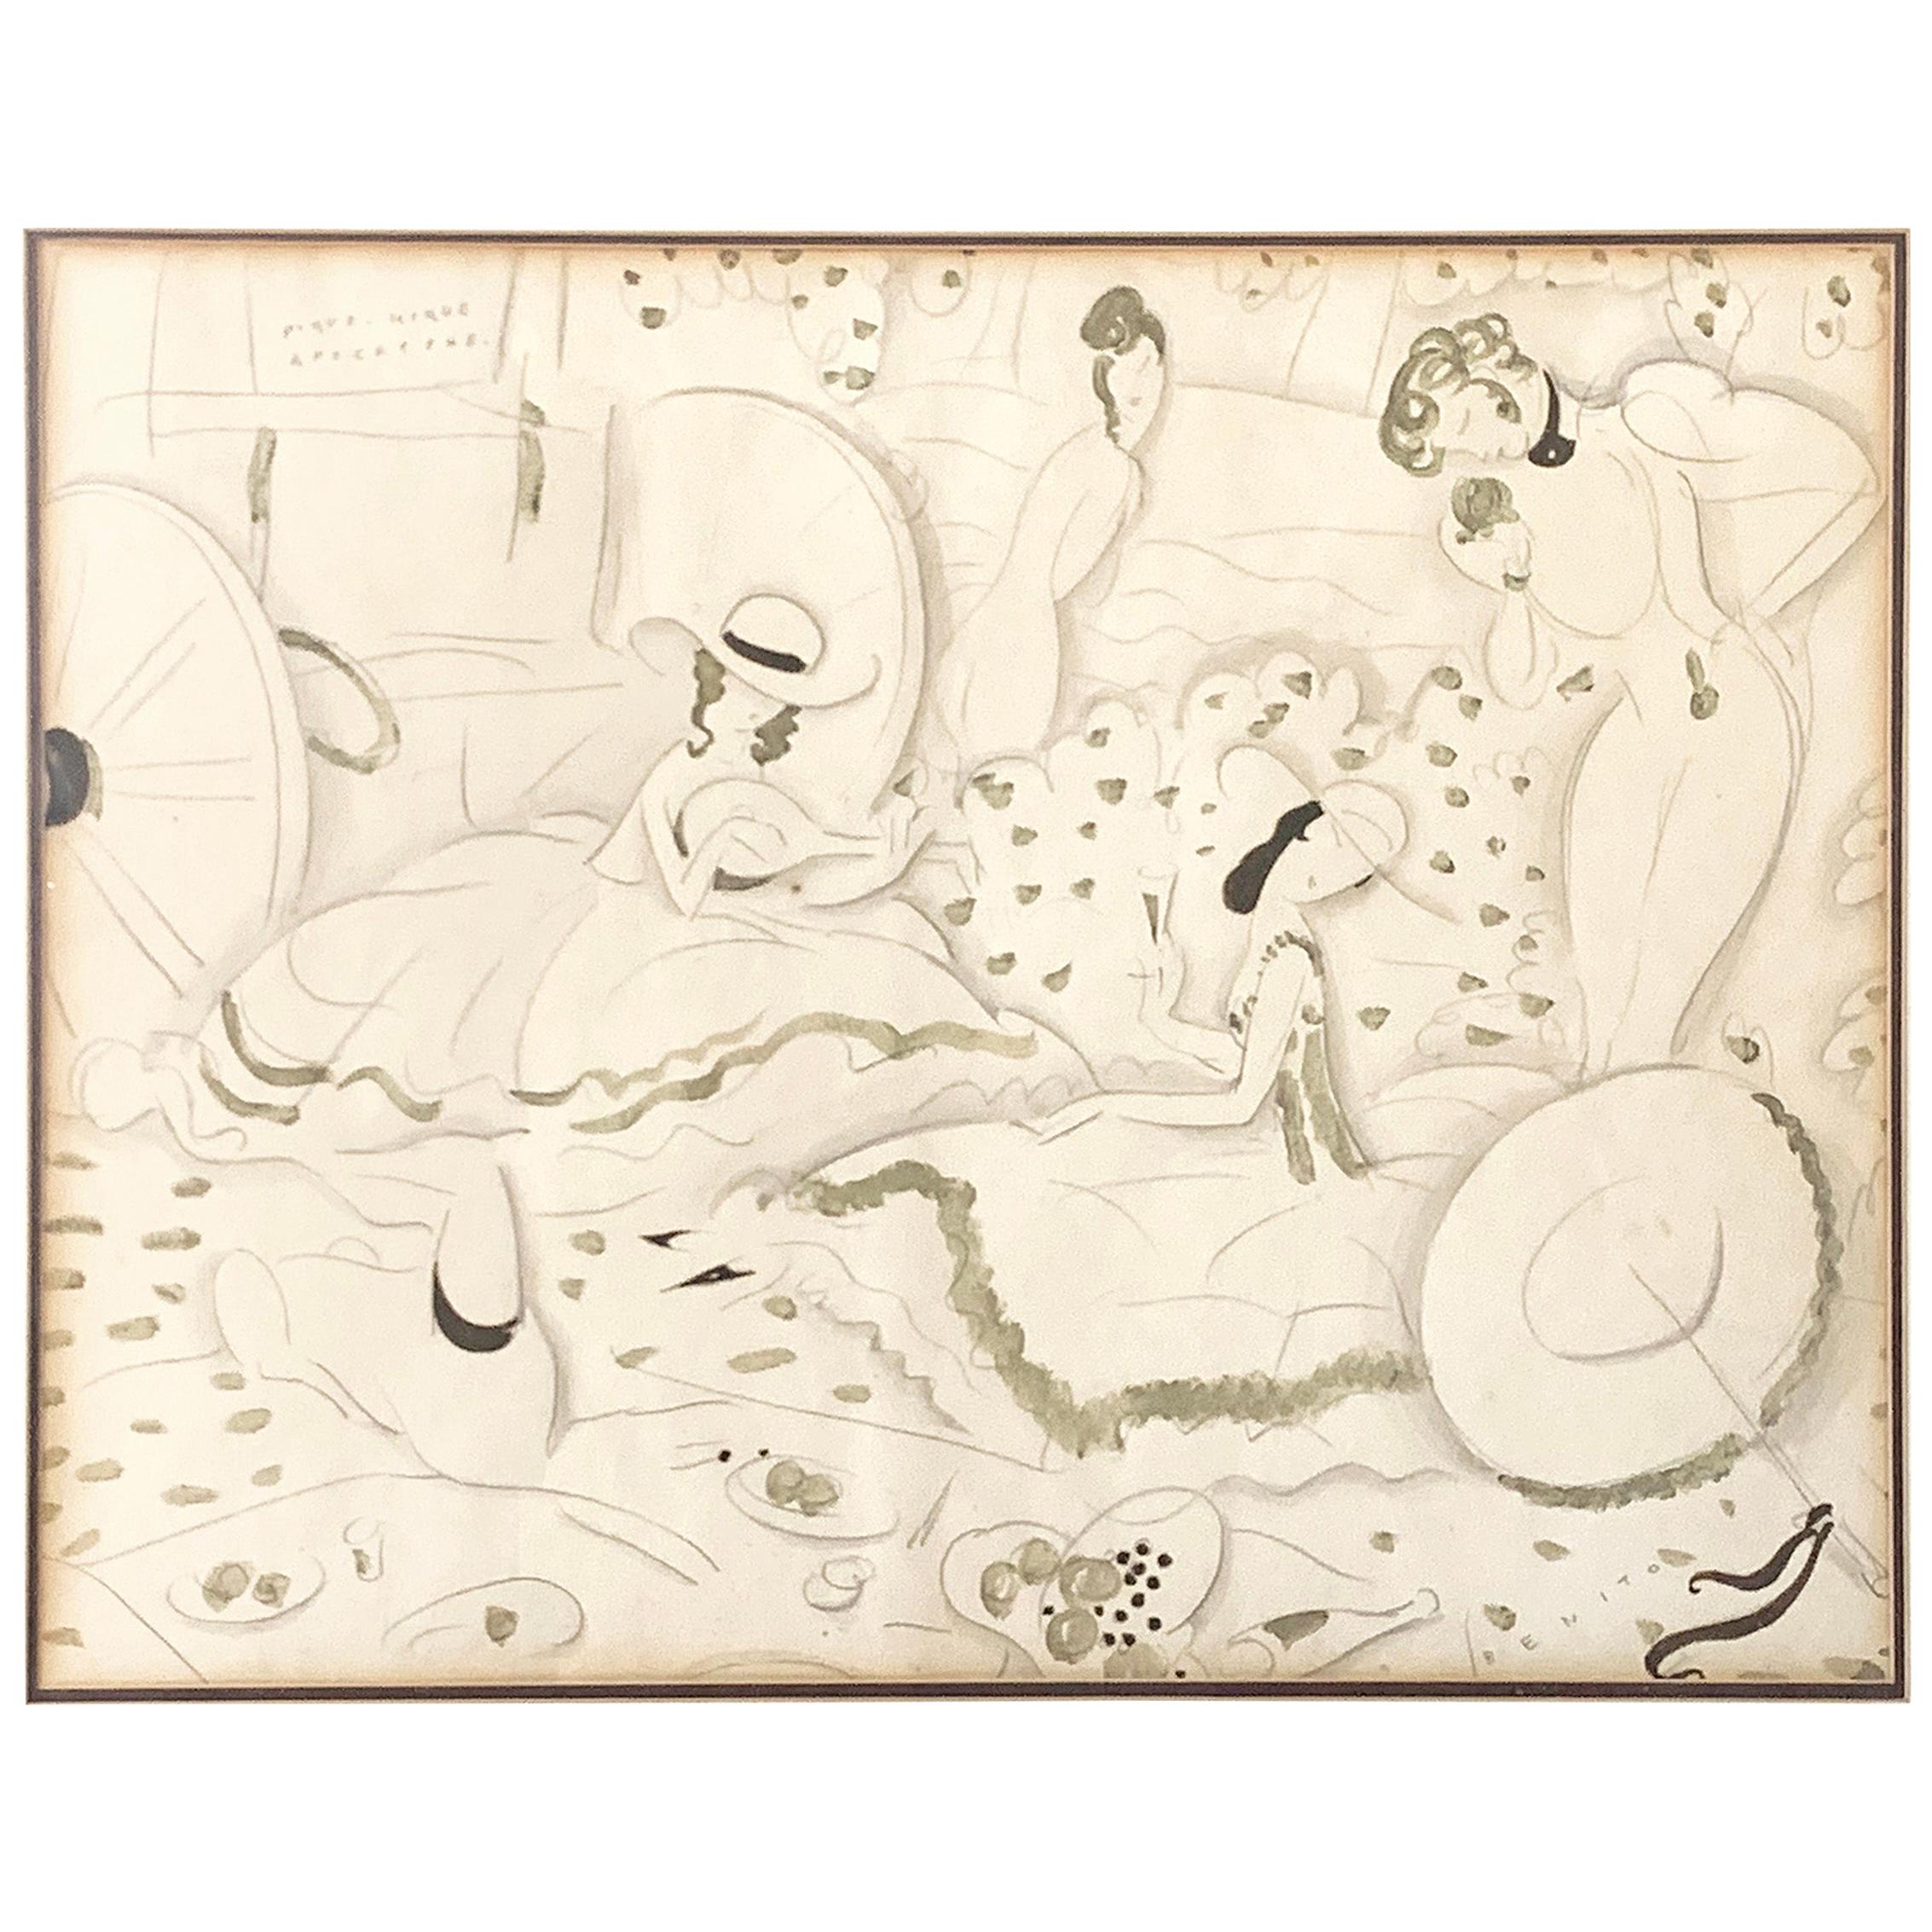 "Picnic Apocryphal, " Sophisticated Art Deco Drawing by Benito, Vogue Pioneer For Sale